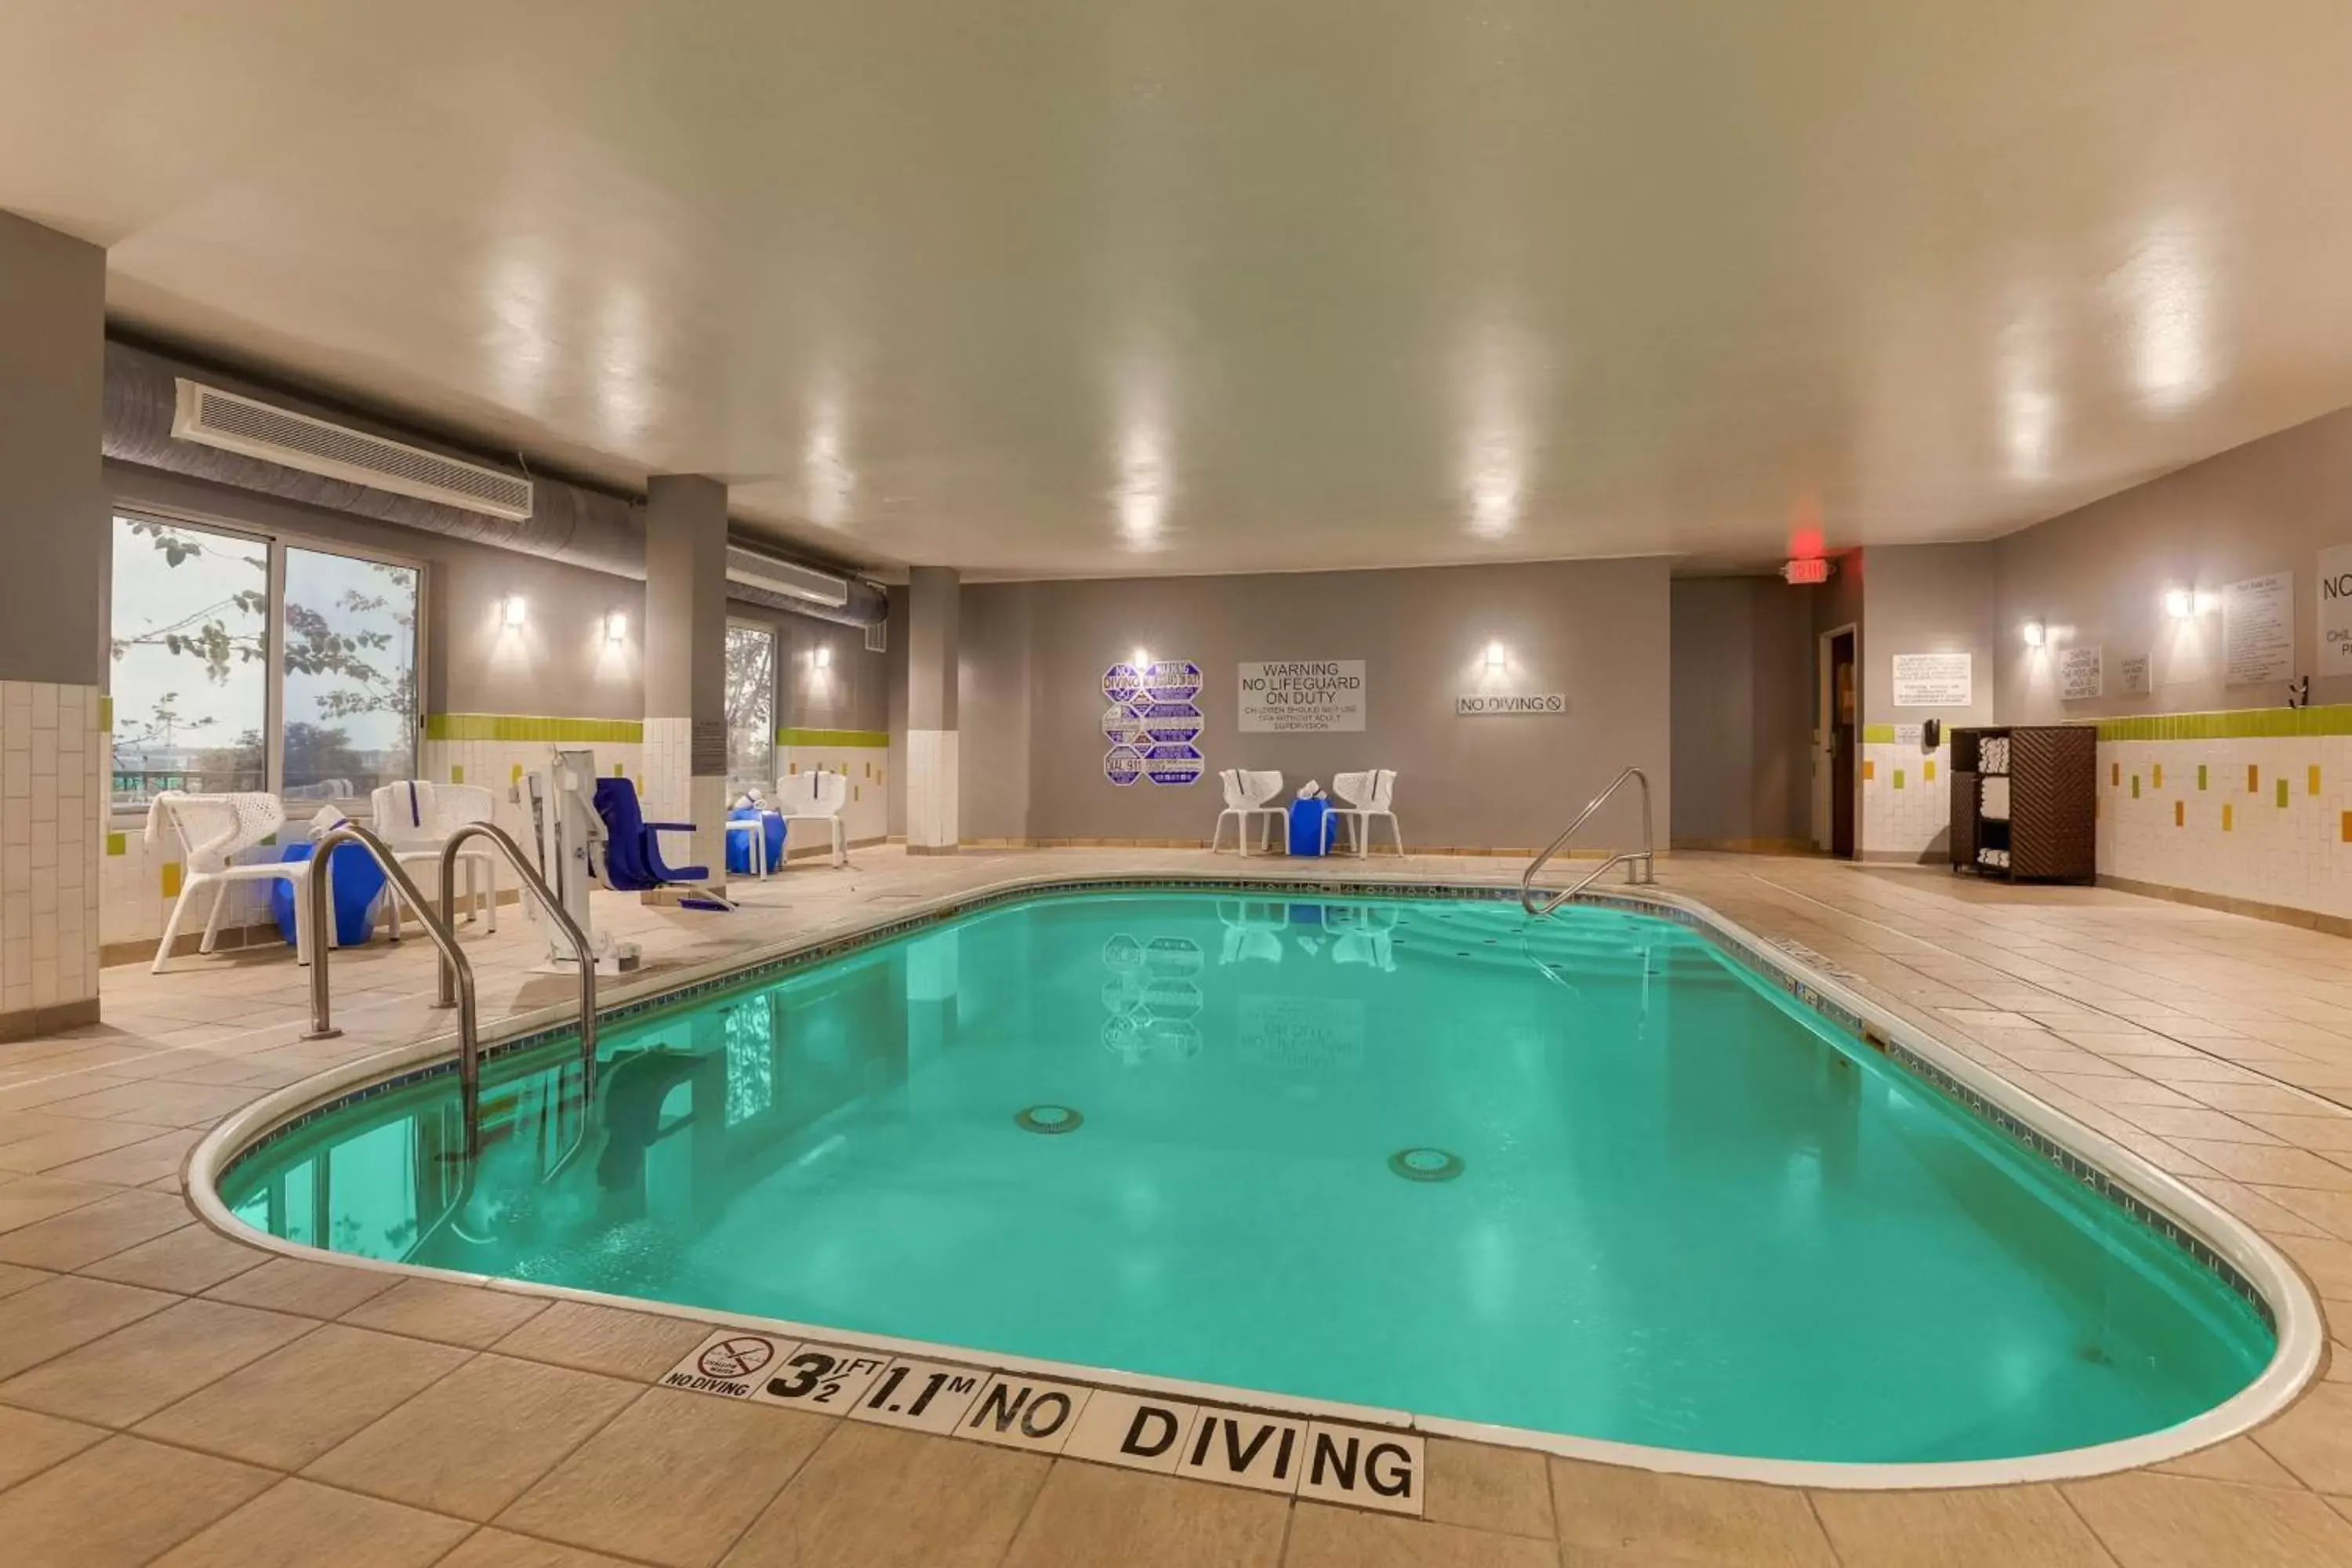 Swimming Pool in Fairfield Inn & Suites by Marriott Fort Worth I-30 West Near NAS JRB